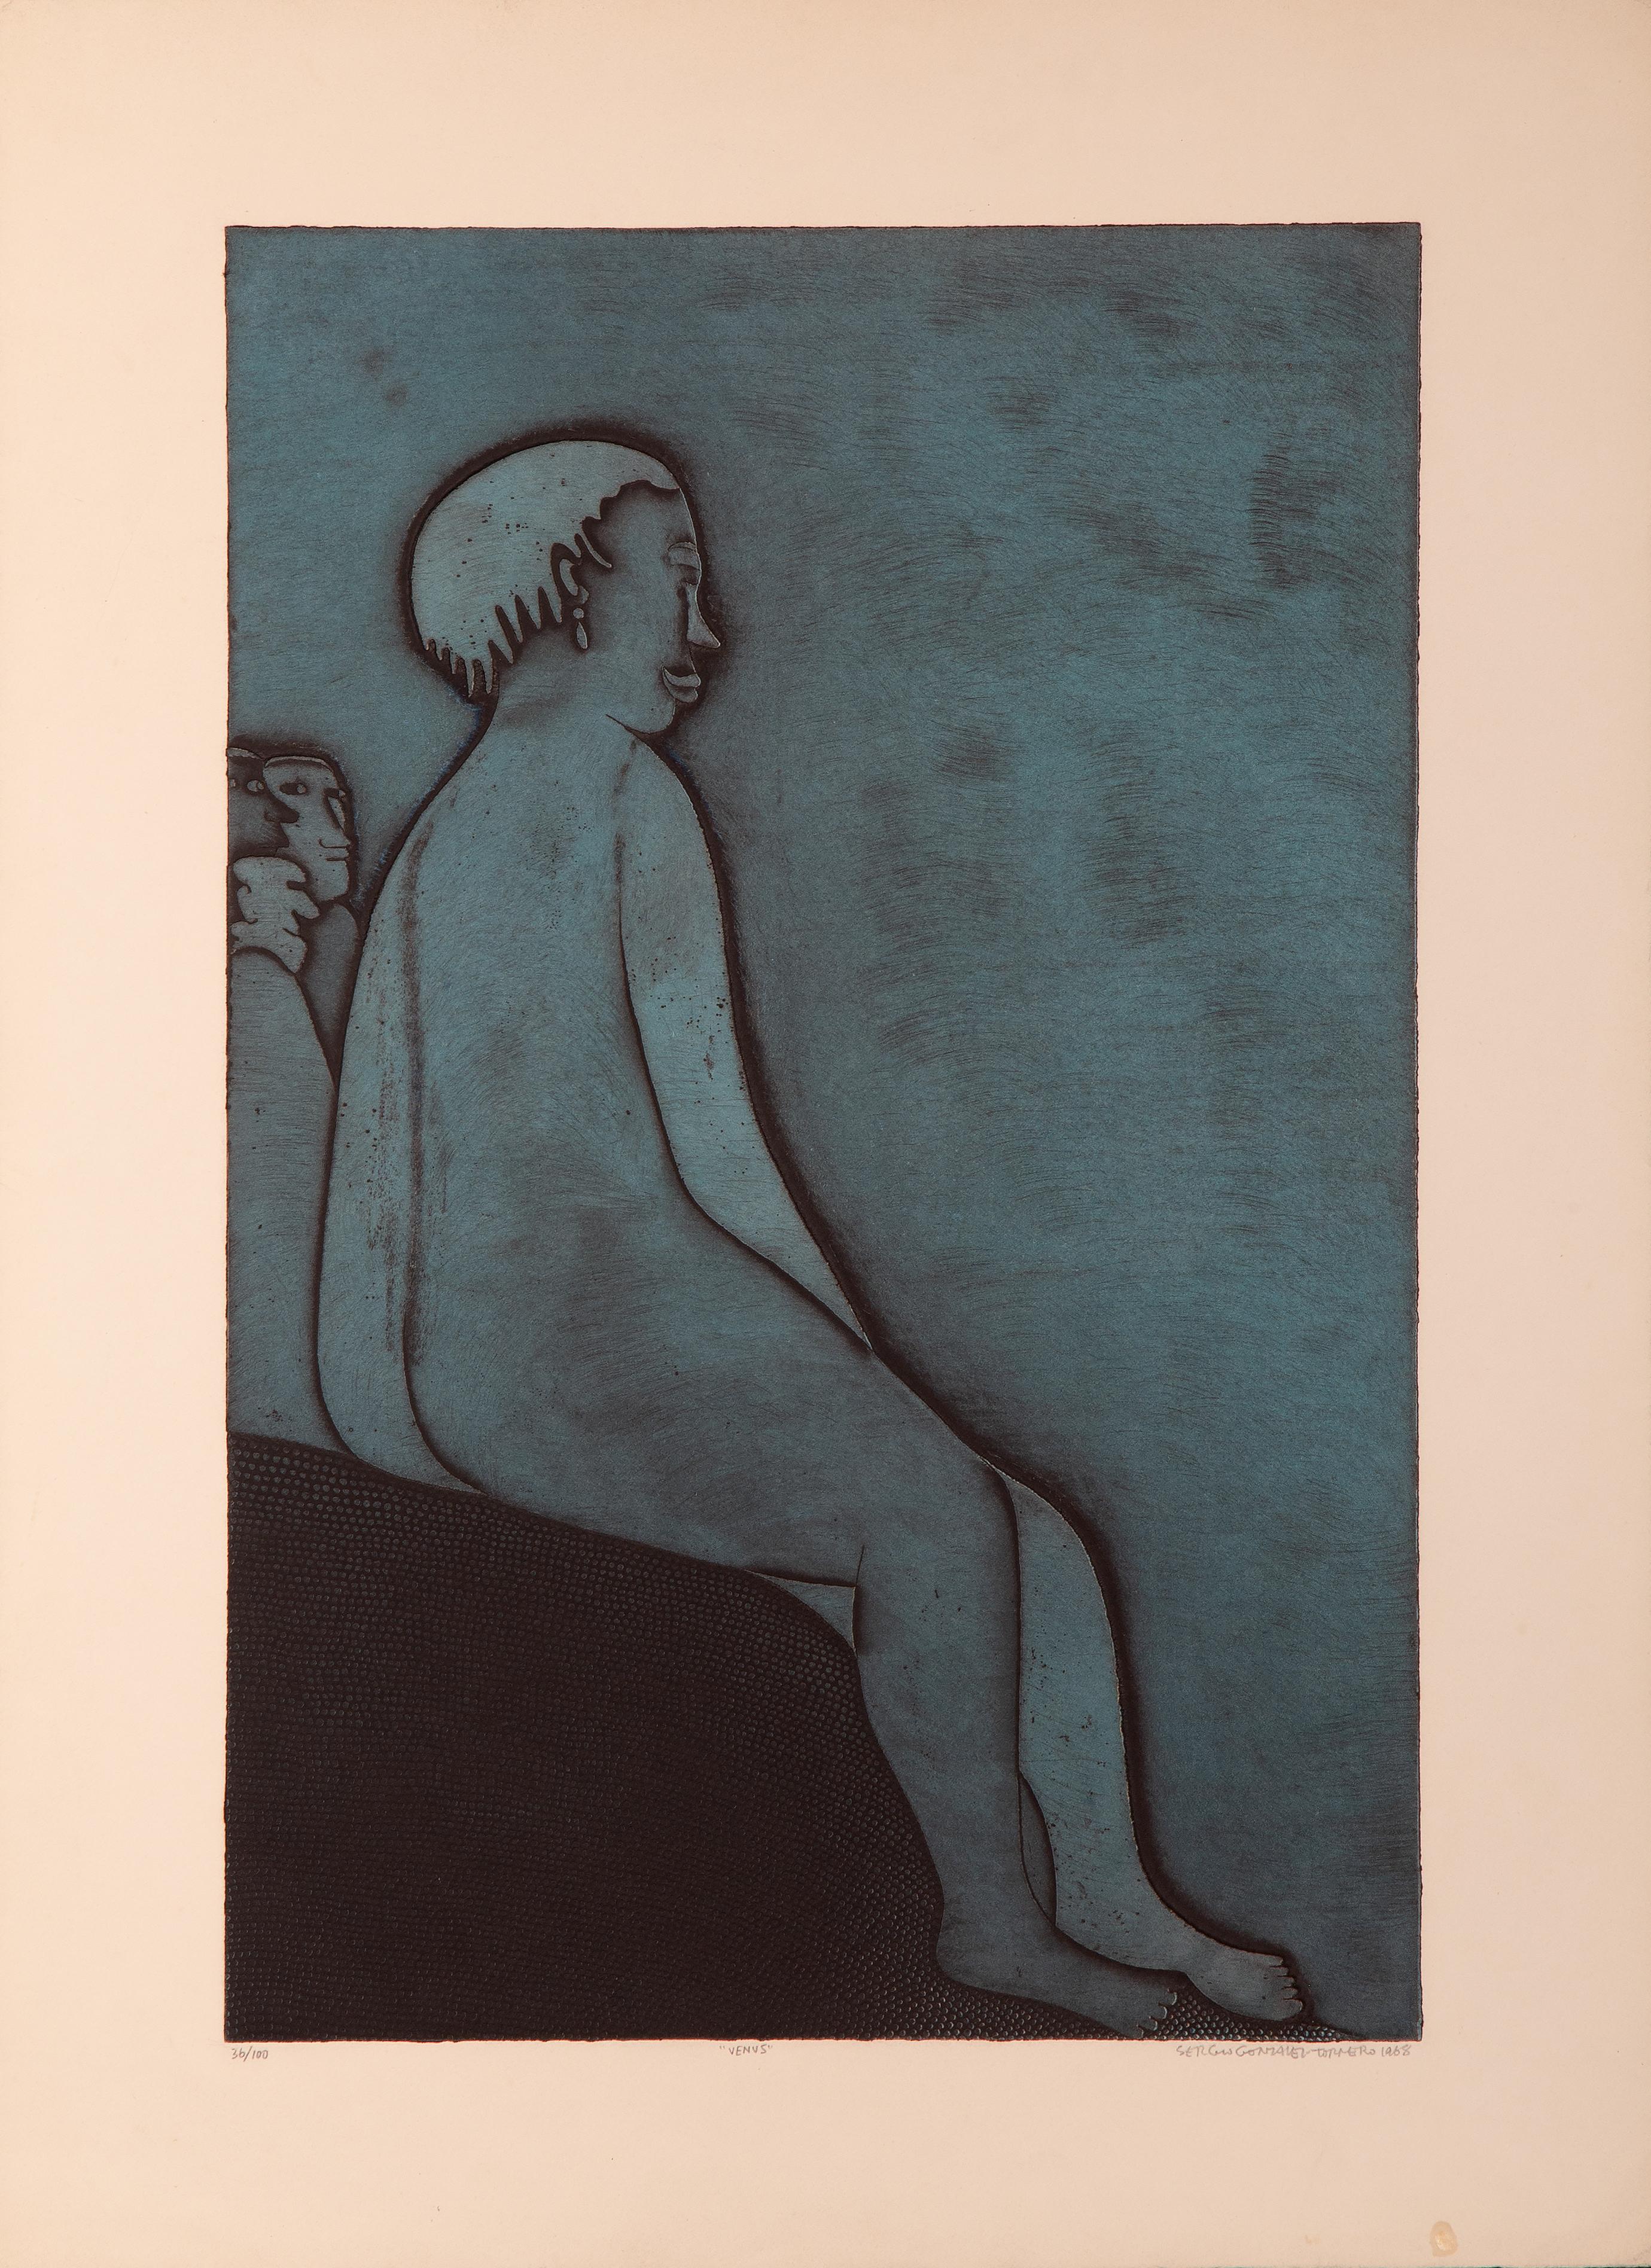 Venus
Sergio Gonzales-Tornero, Chilean (1927)
Date: 1968
Etching with Aquatint, signed, numbered, dated and titled in pencil
Edition of 36/100
Image Size: 24 x 15.75 inches
Size: 30 x 21.75 in. (76.2 x 55.25 cm)